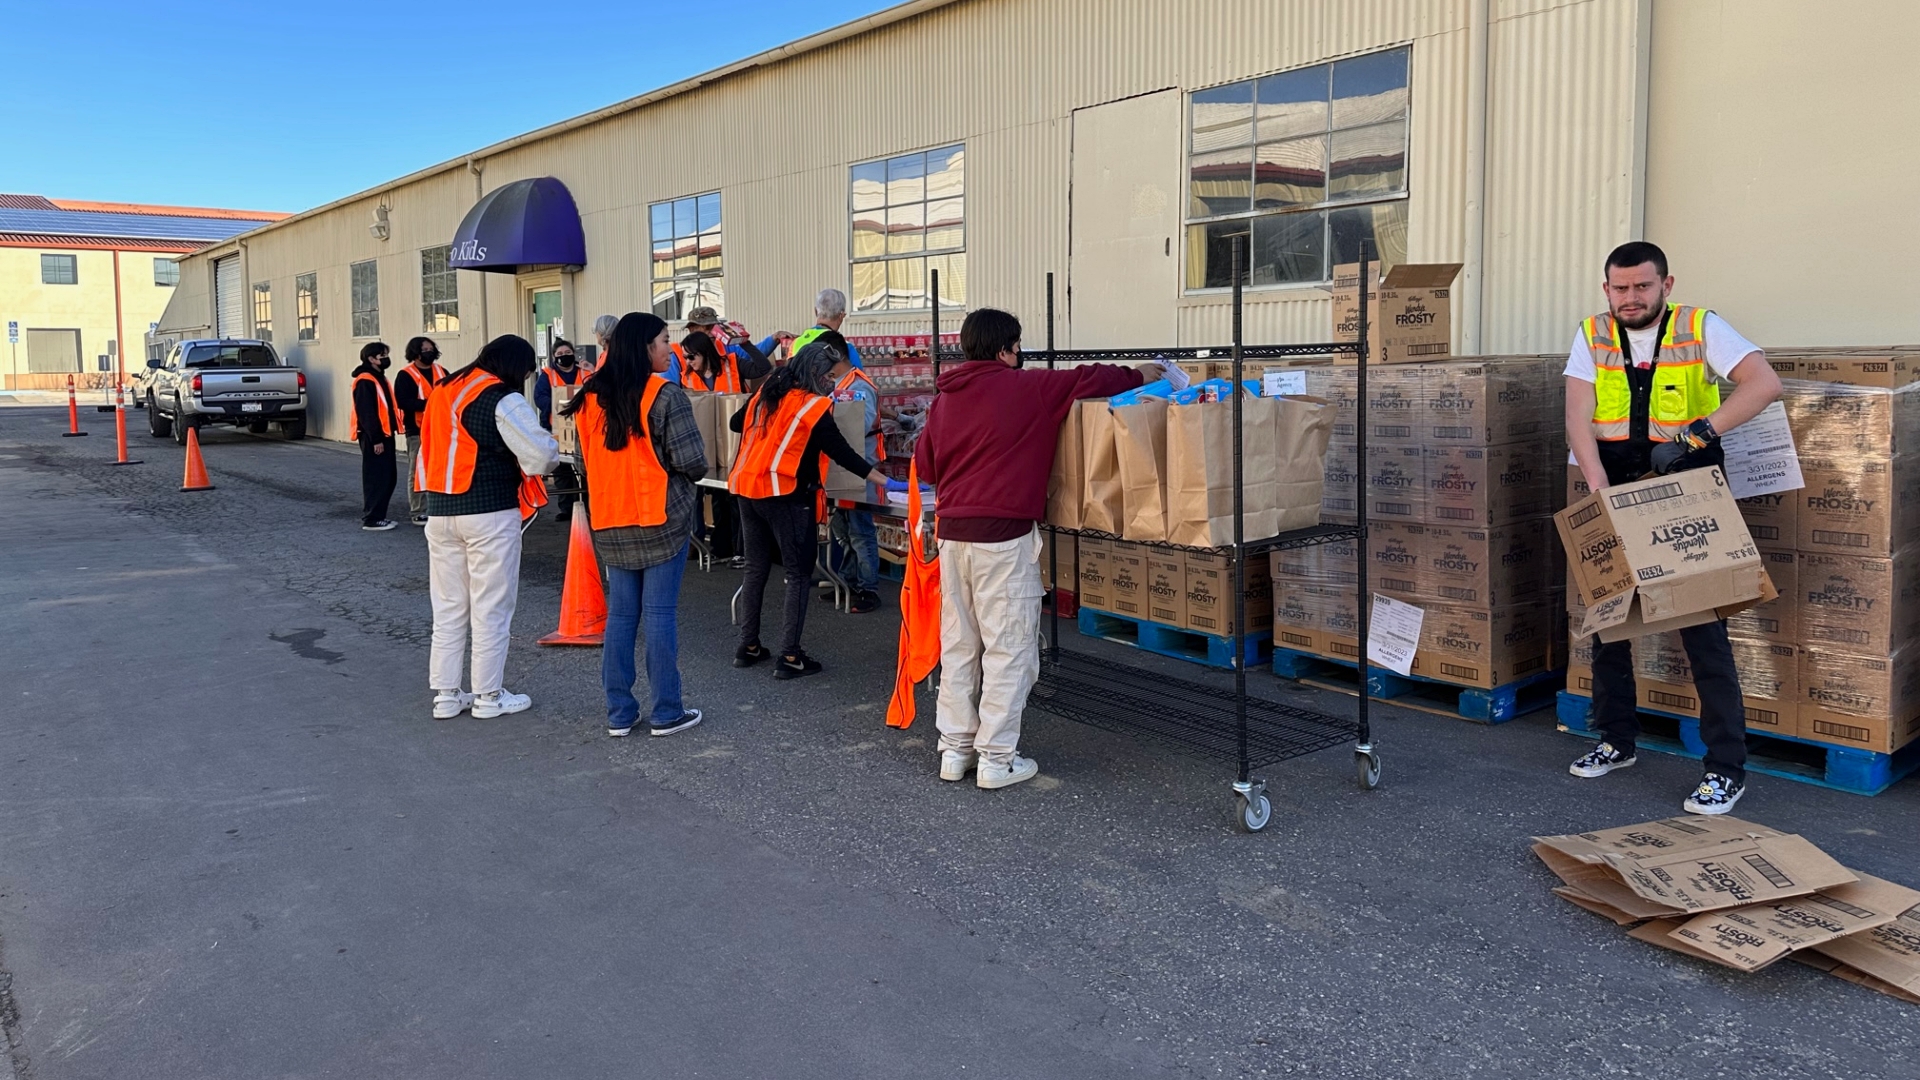 Community Food Bank of San Benito County works with volunteers to distribute food.